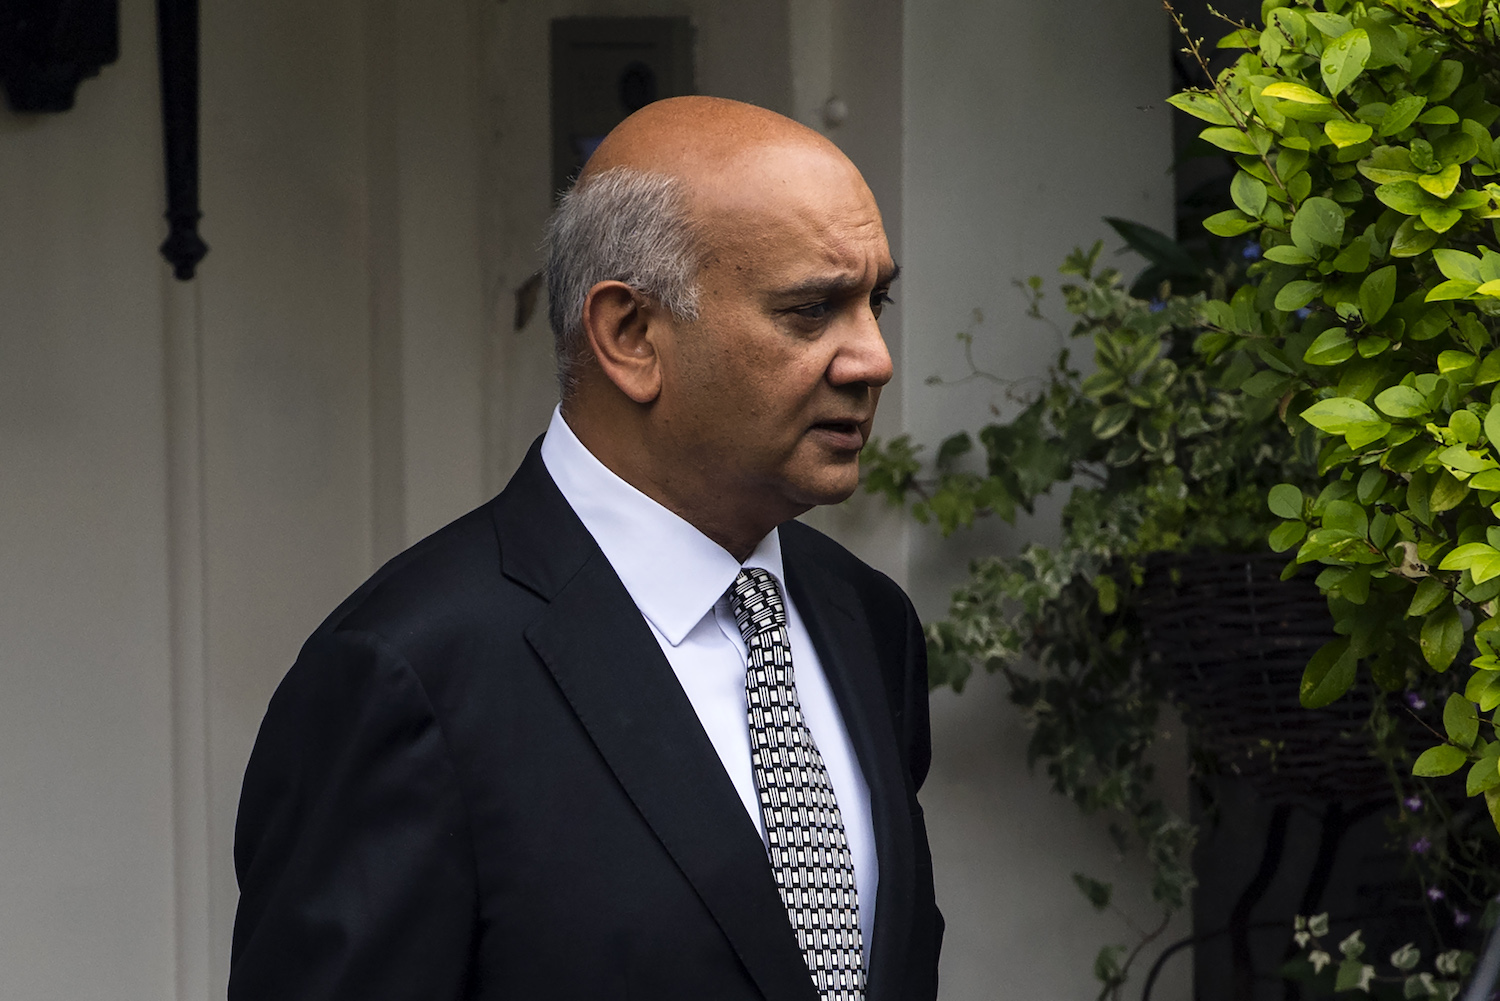 A Sunday Newspaper Exposes Keith Vaz MP Paying For Male Escorts